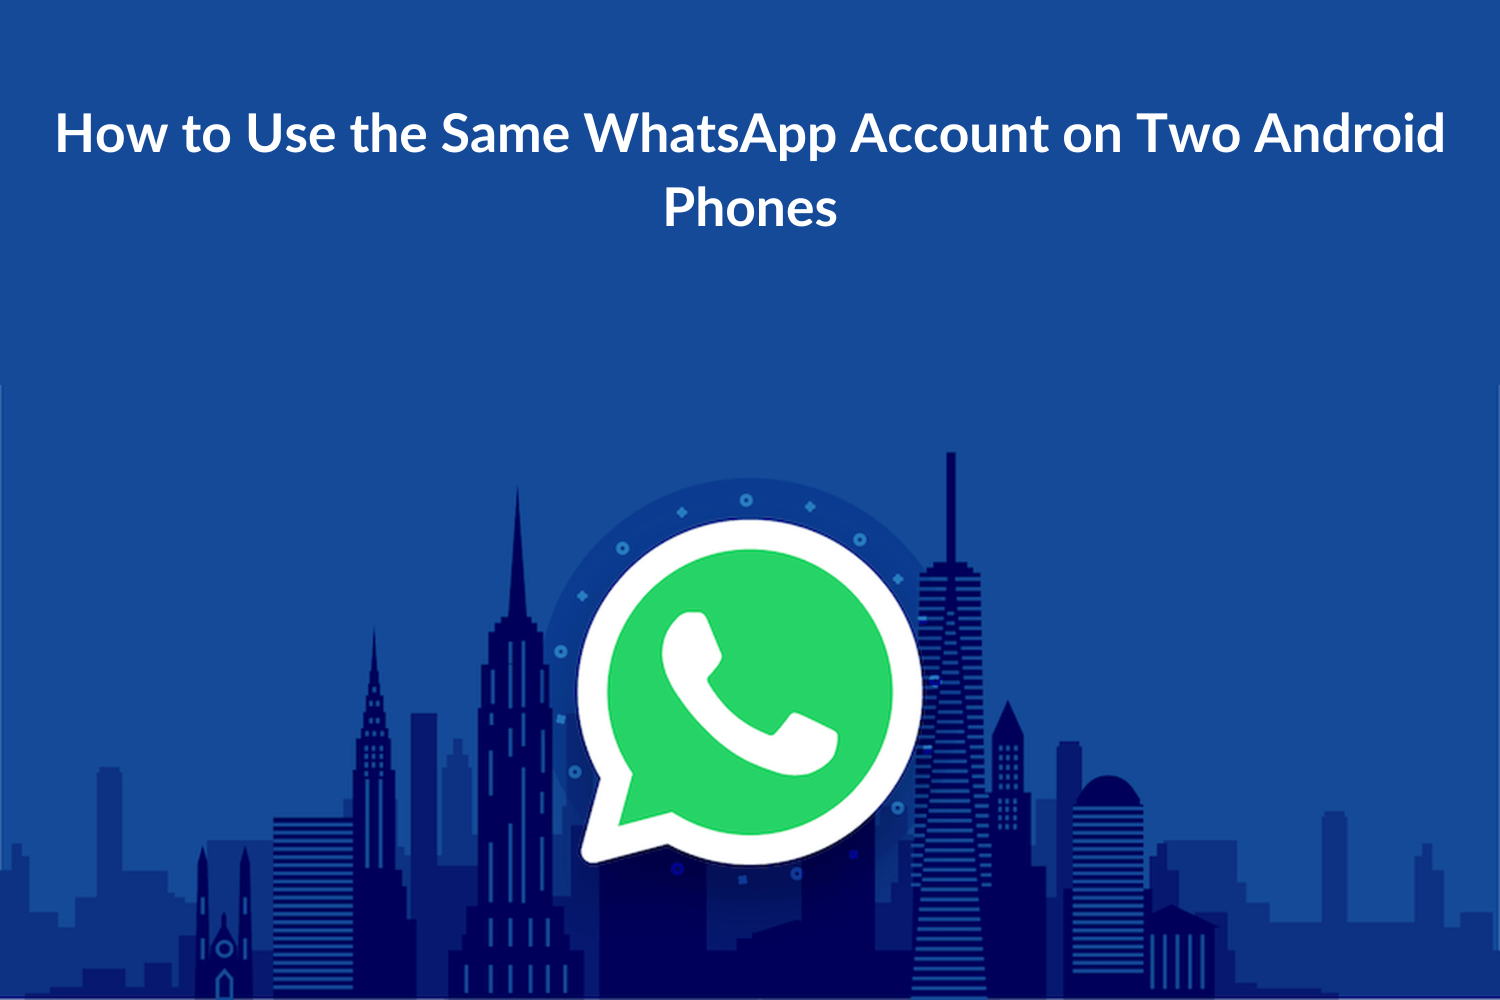 How to Use the Same WhatsApp Account on Two Android Phones